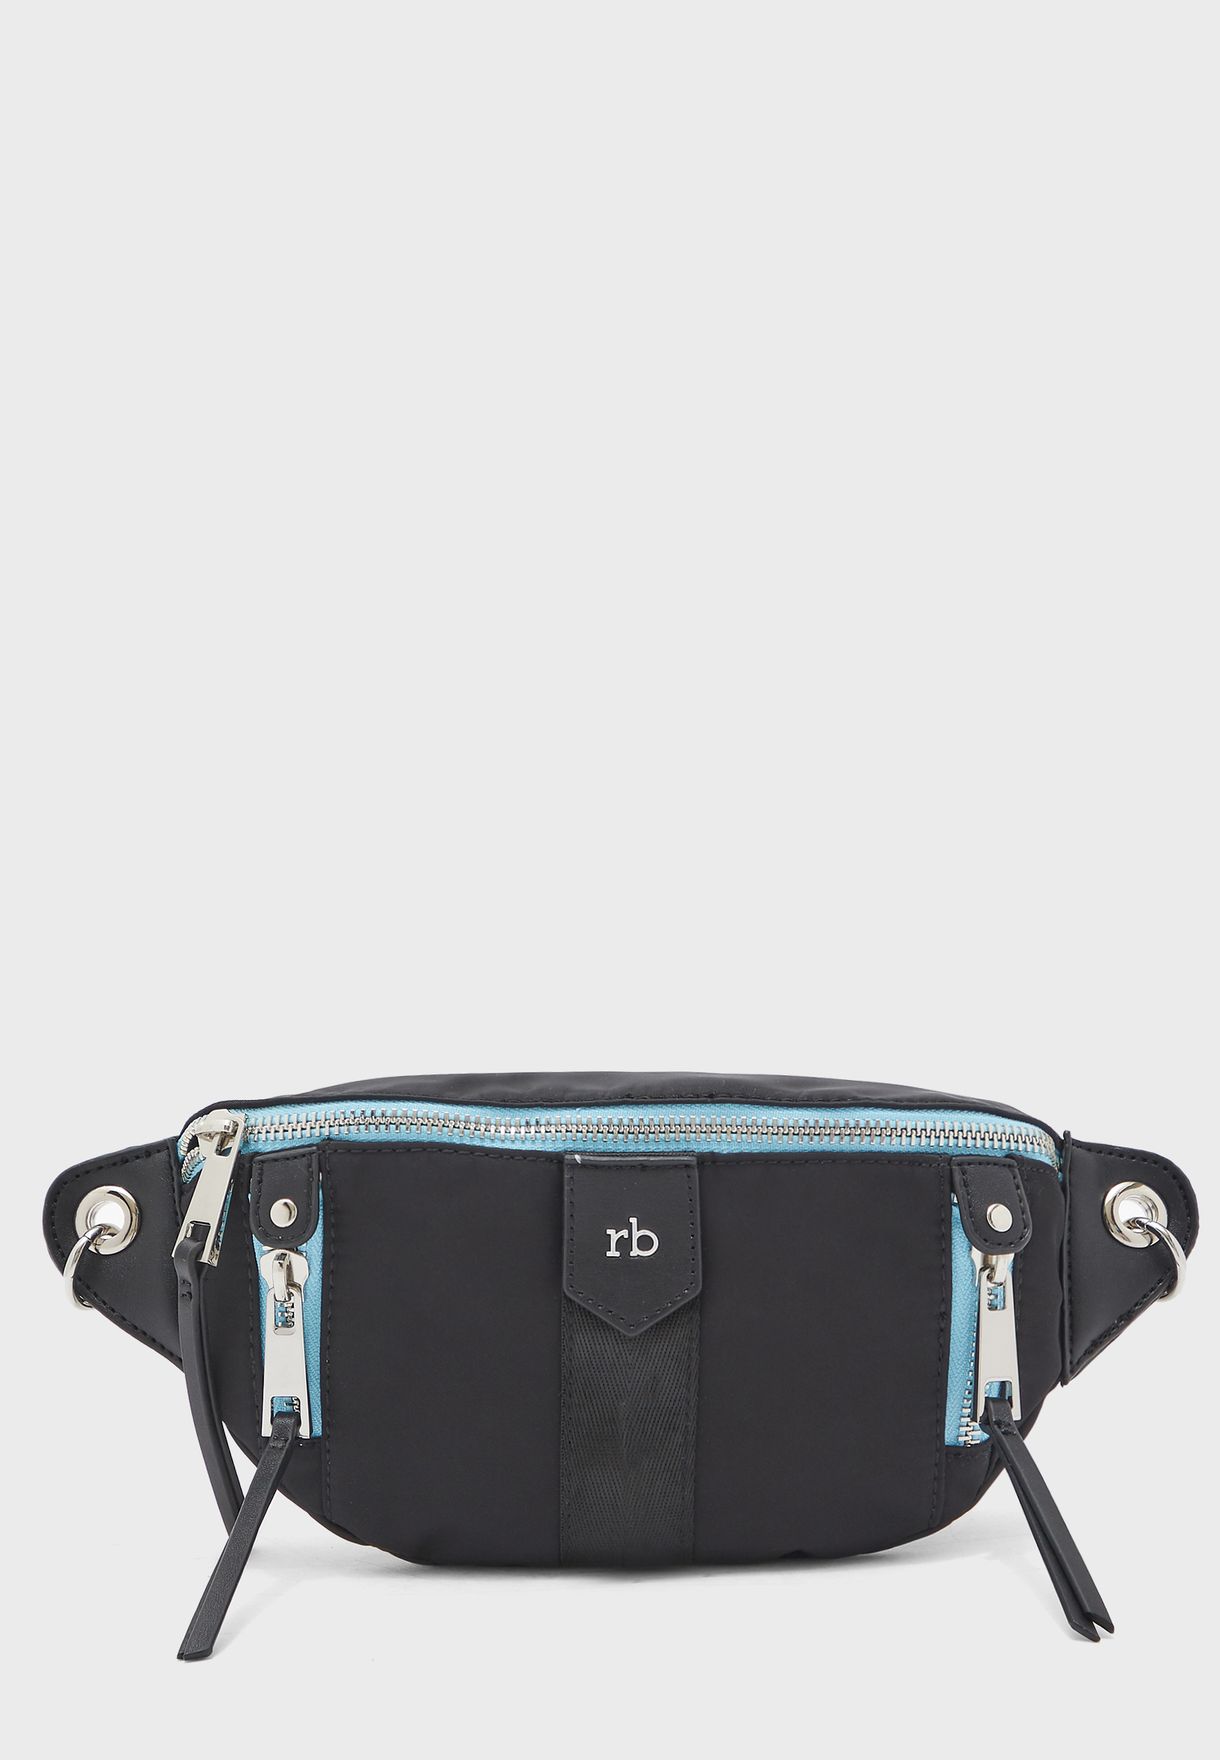 Buy Roccobarocco Black Brise Bumbag For Women In Mena Worldwide Rbbs3lp04